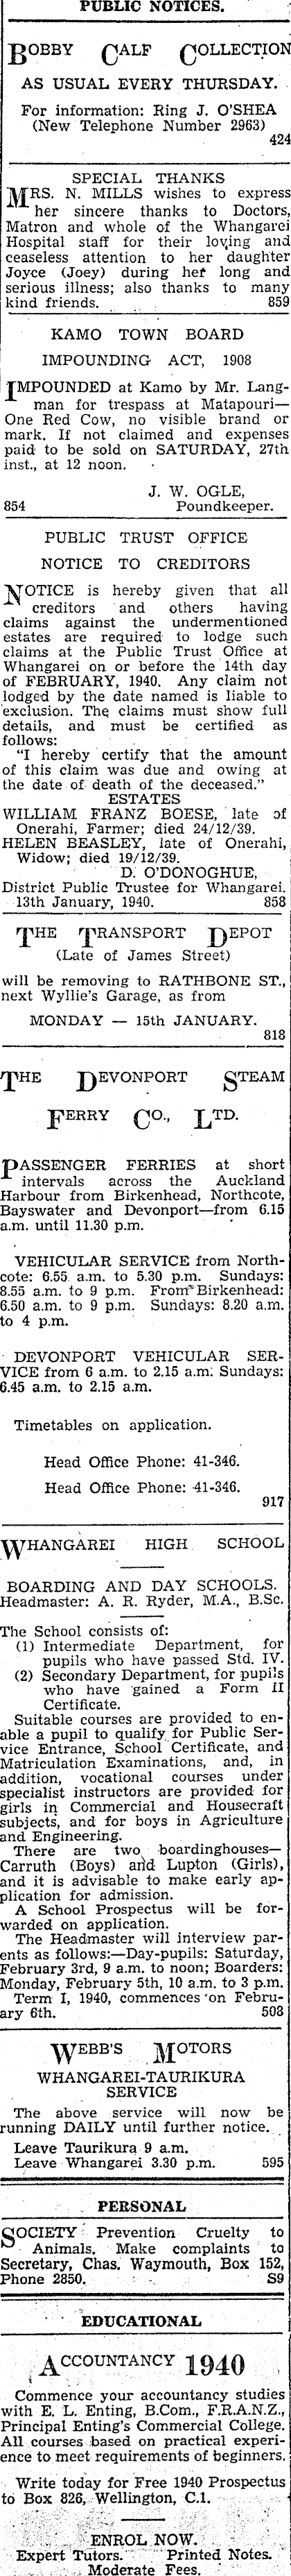 Papers Past Newspapers Northern Advocate 13 January 1940 Page 1 Advertisements Column 6